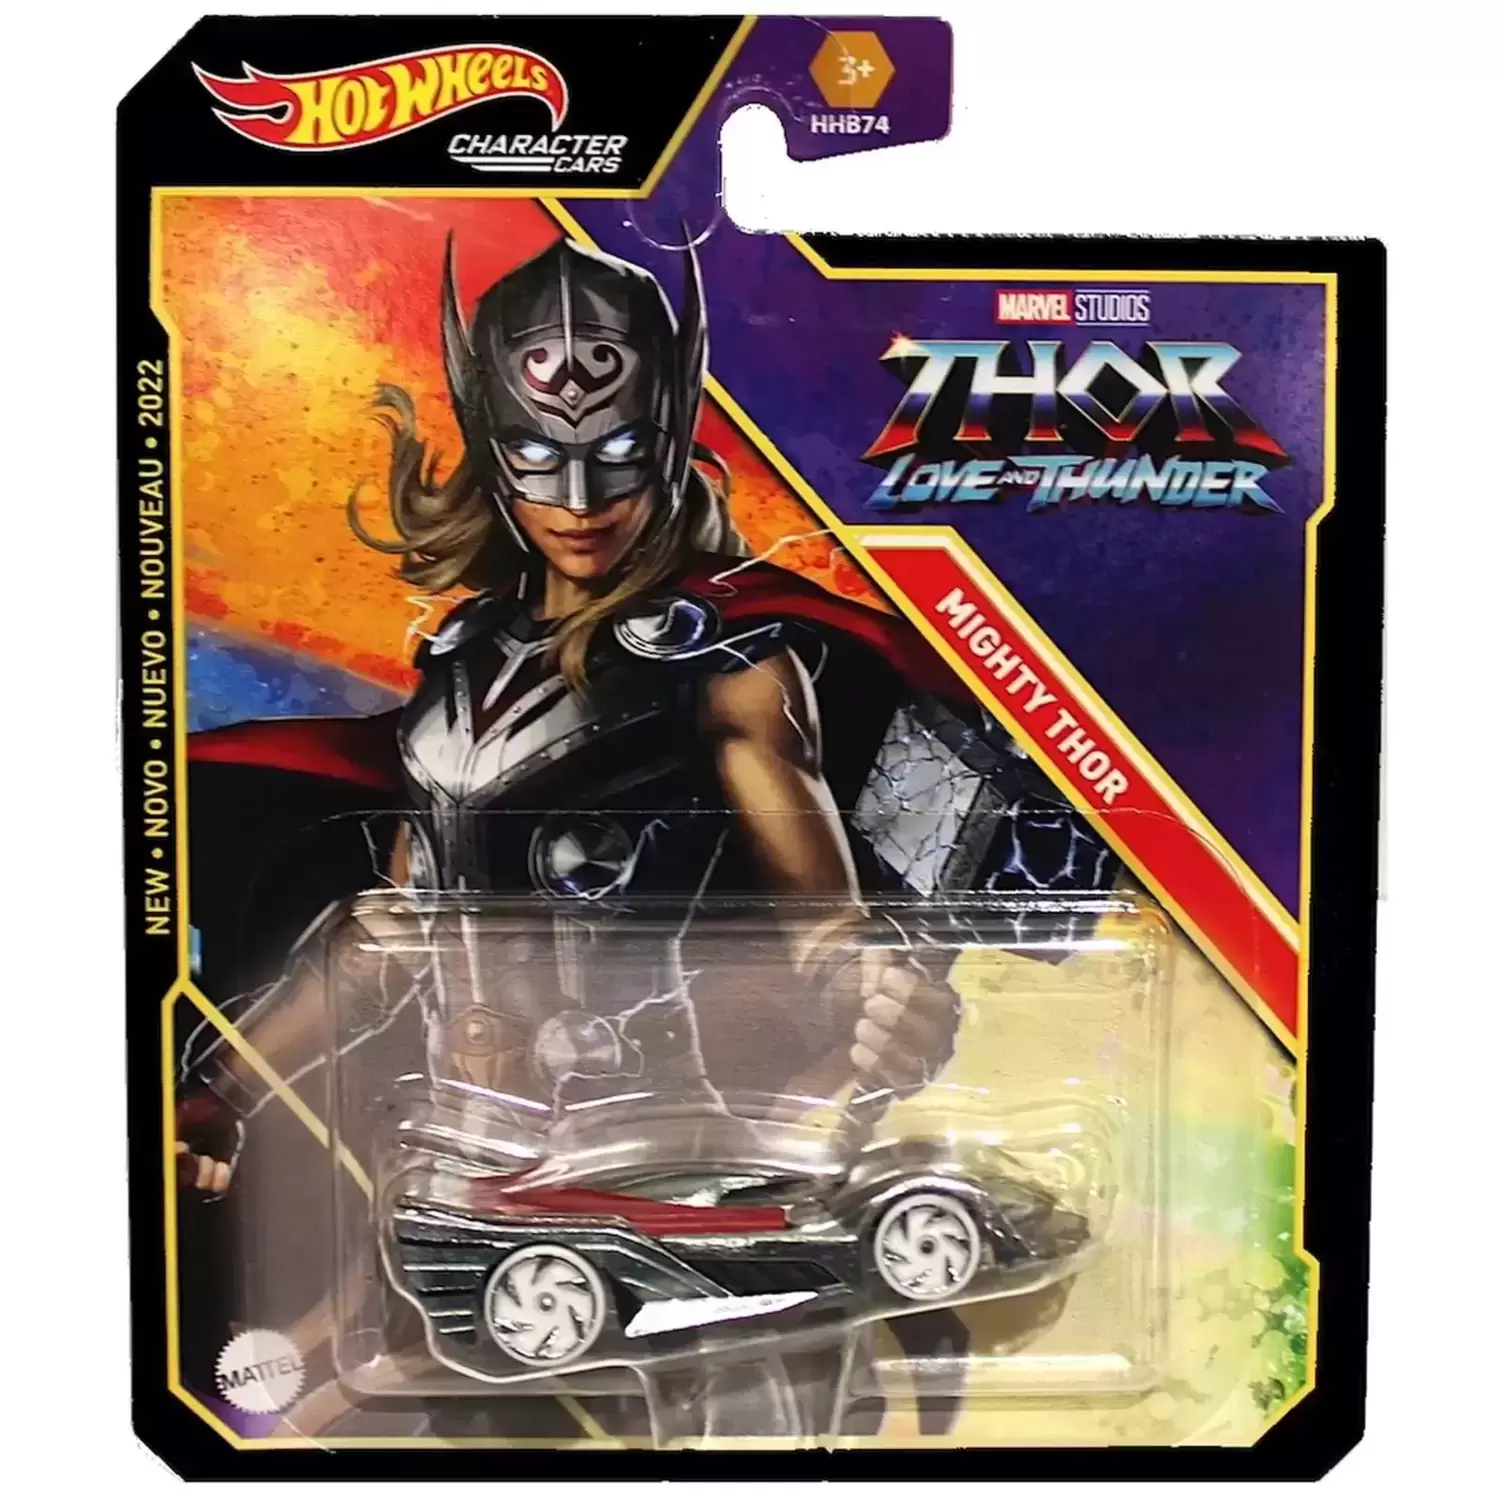 Marvel Character Cars - Thor Love and Thunder - Mighty THor